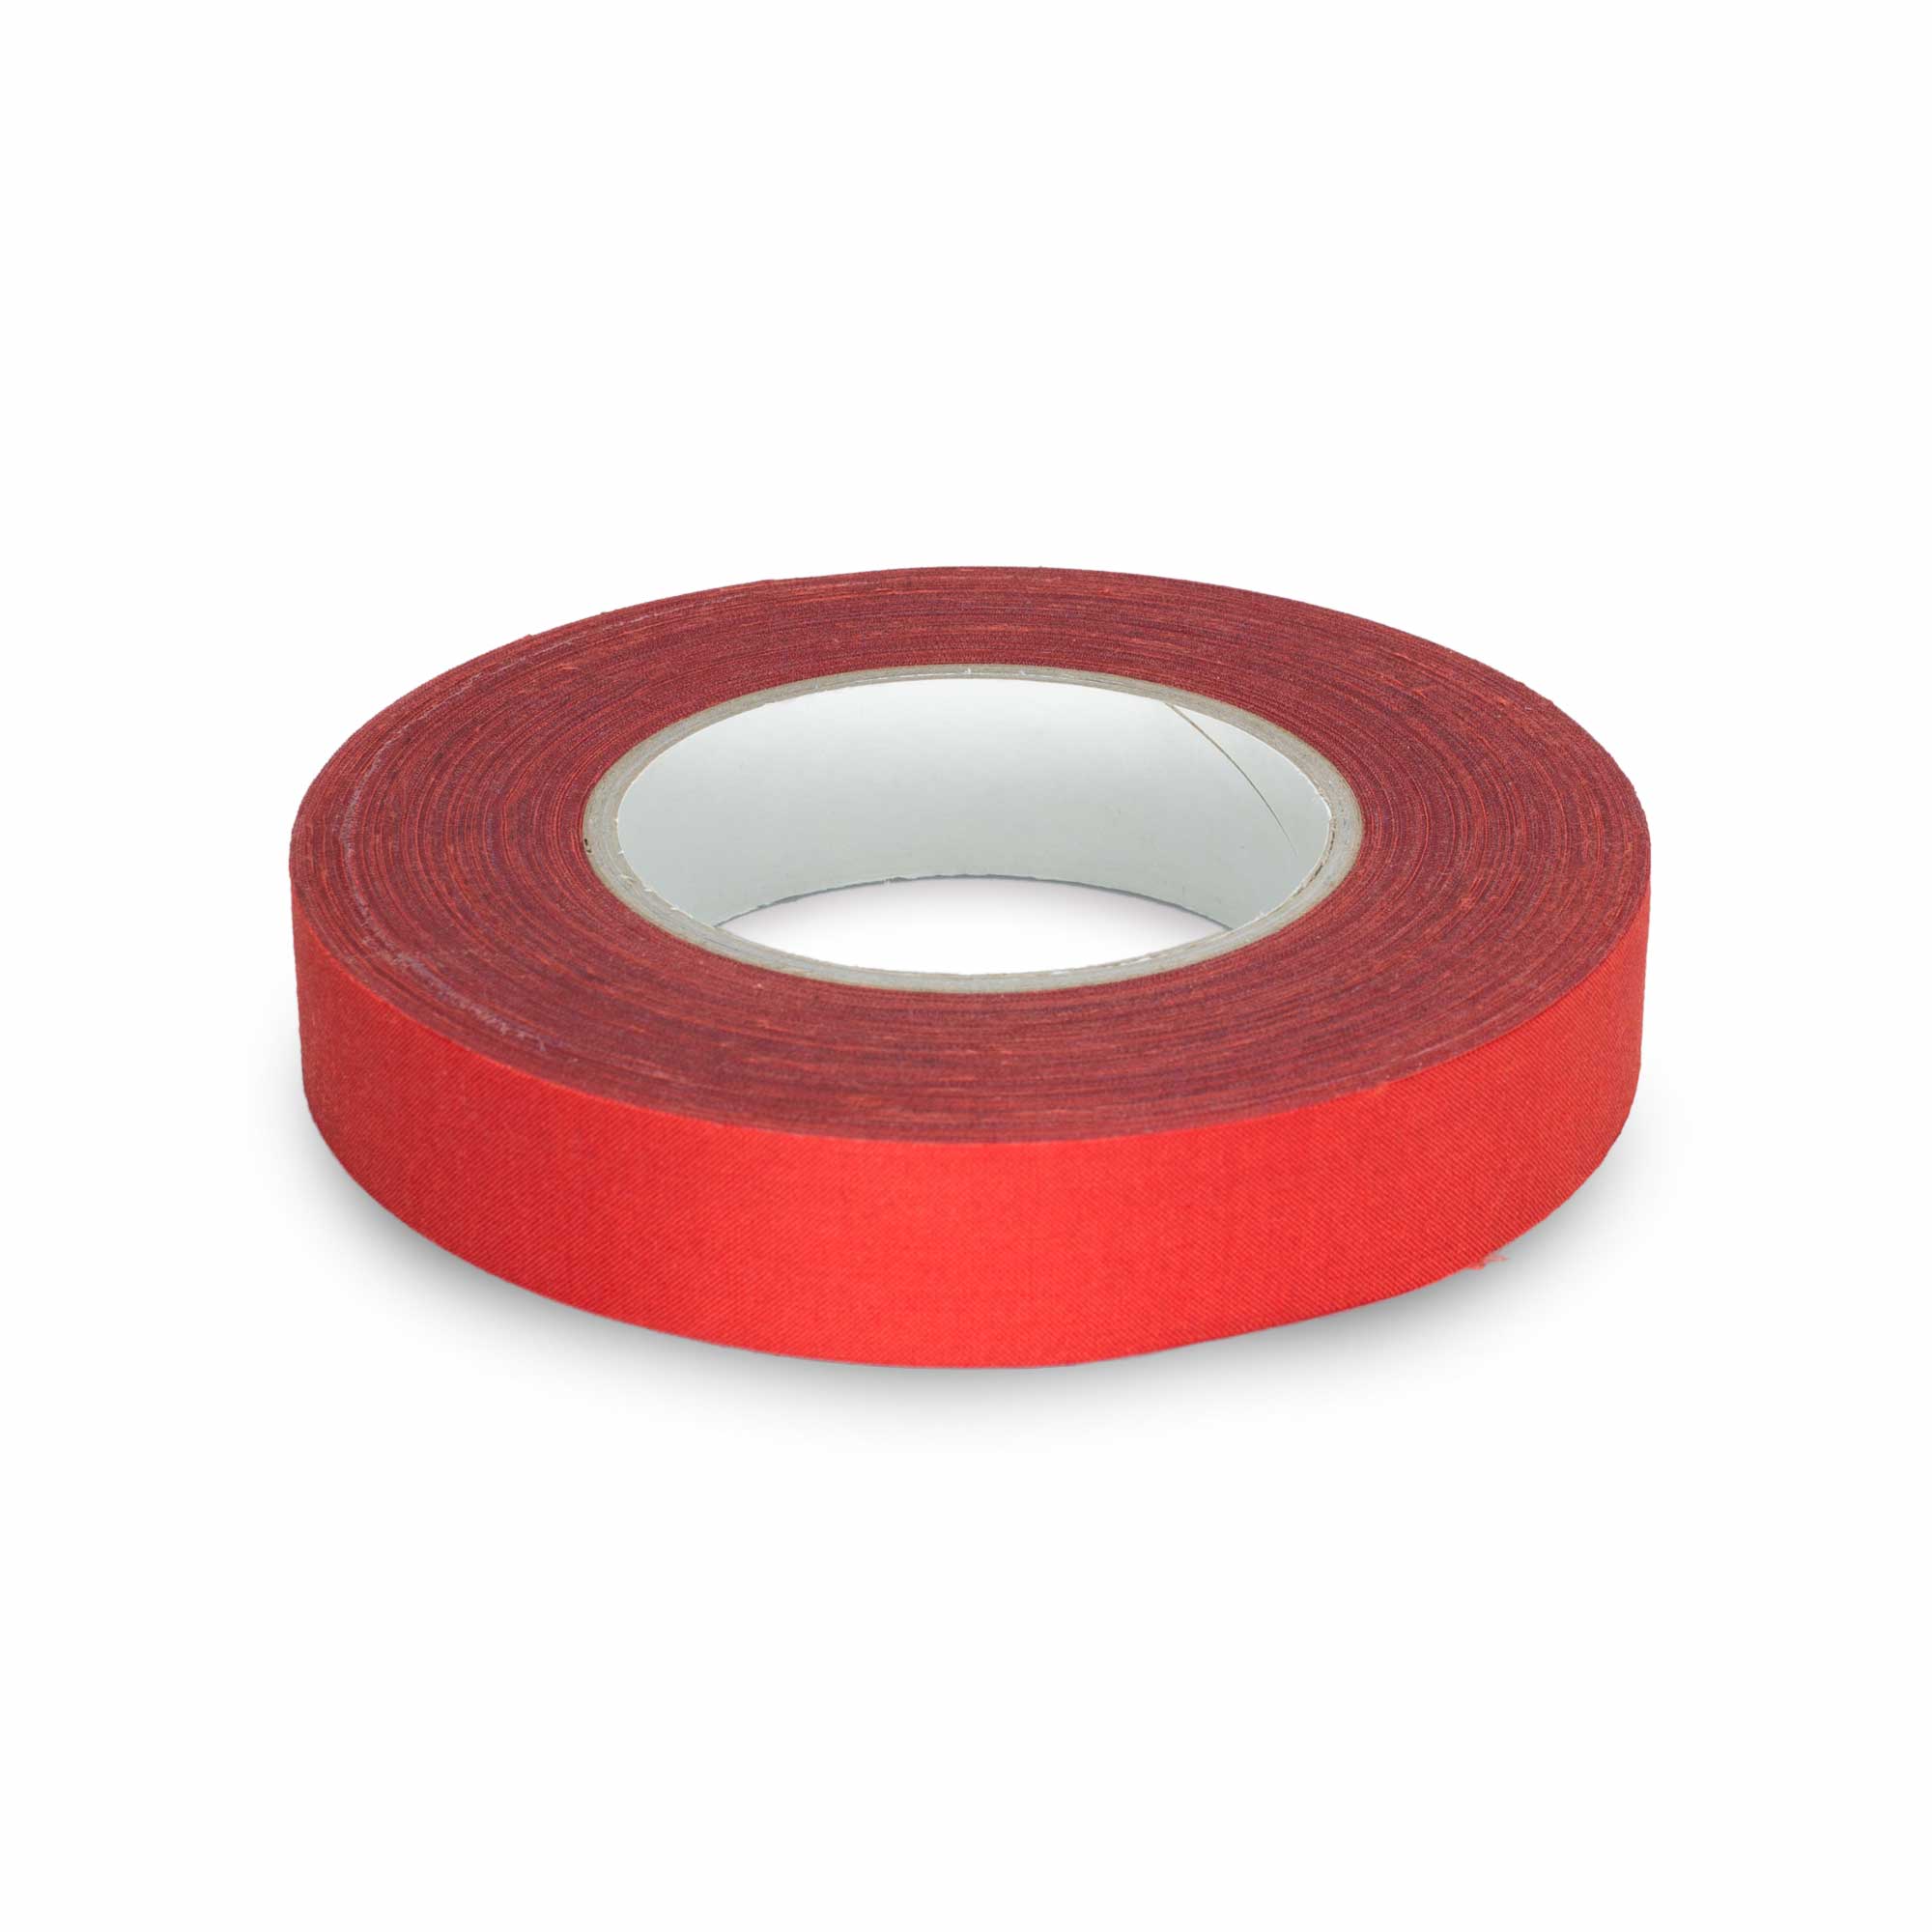 unpackaged red 2.5cm wide tape